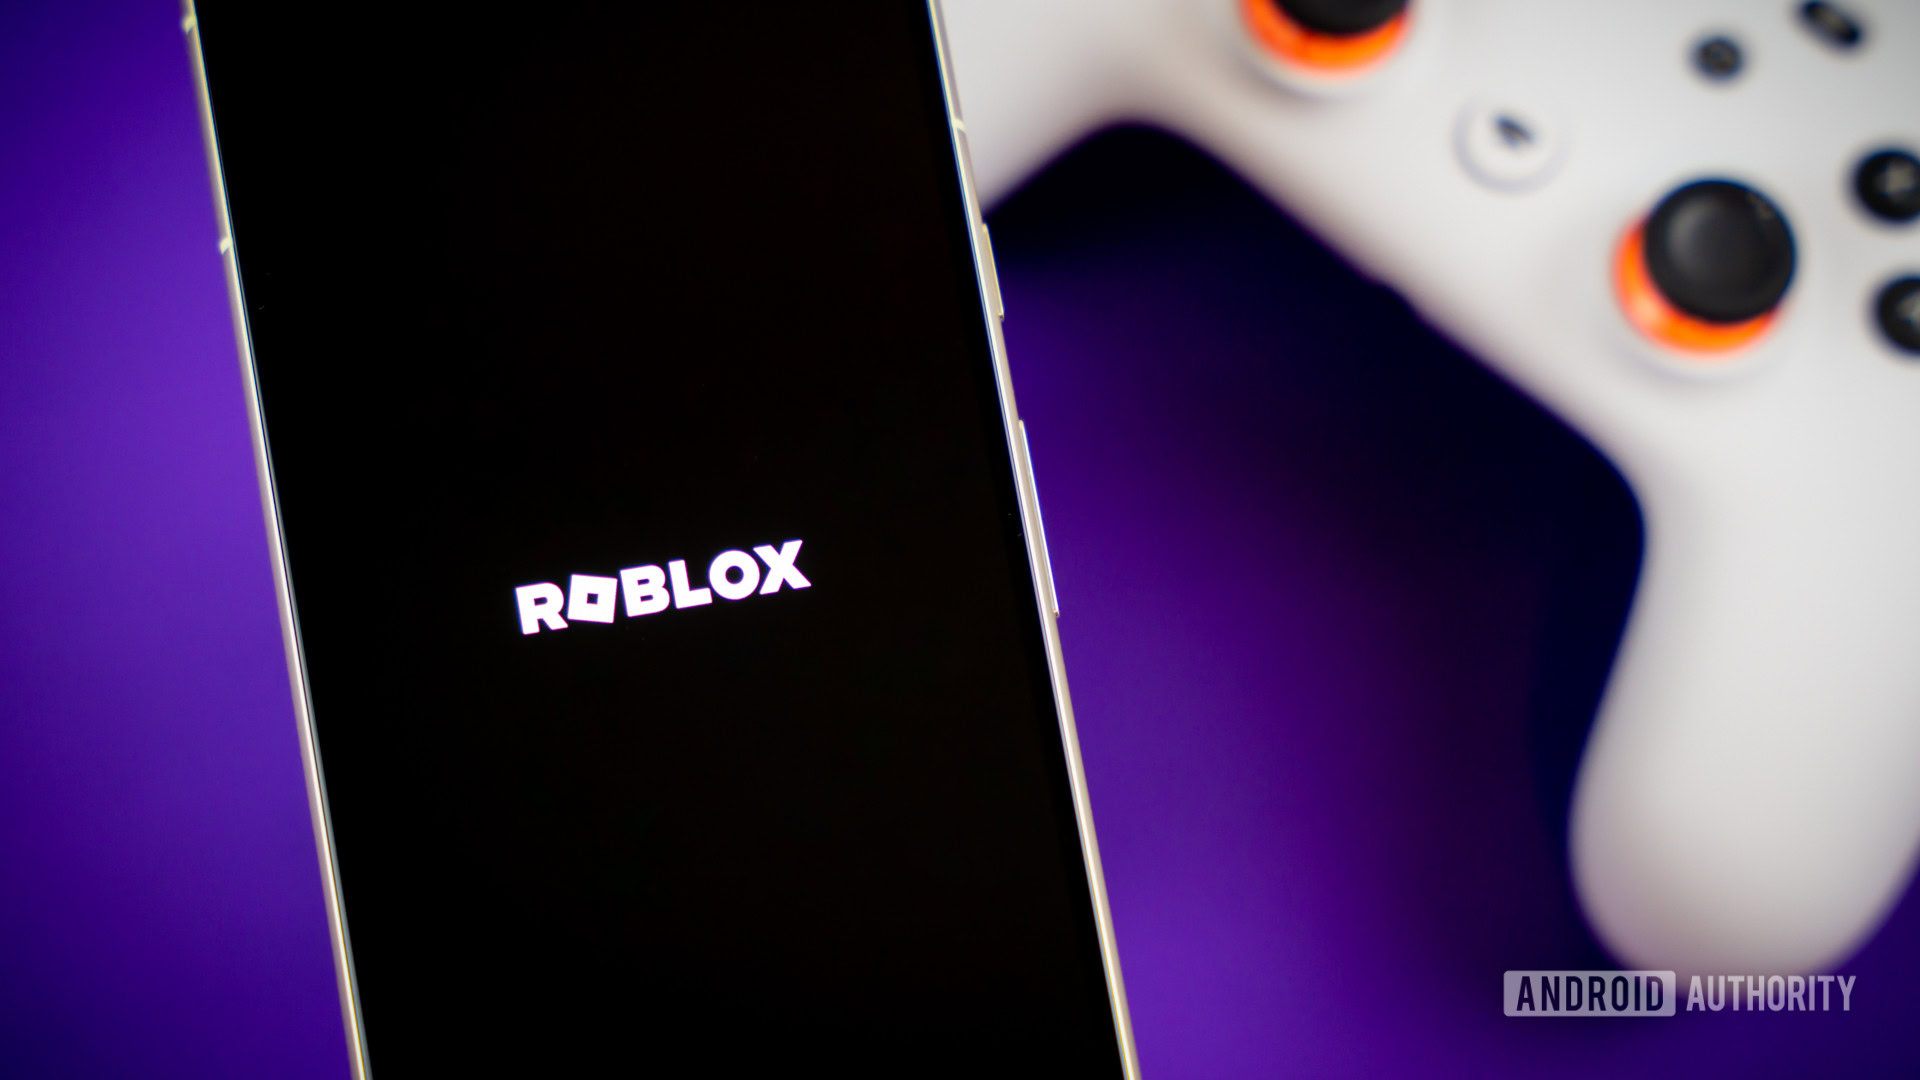 Roblox error code 267: What it is and how to fix it - Android Authority